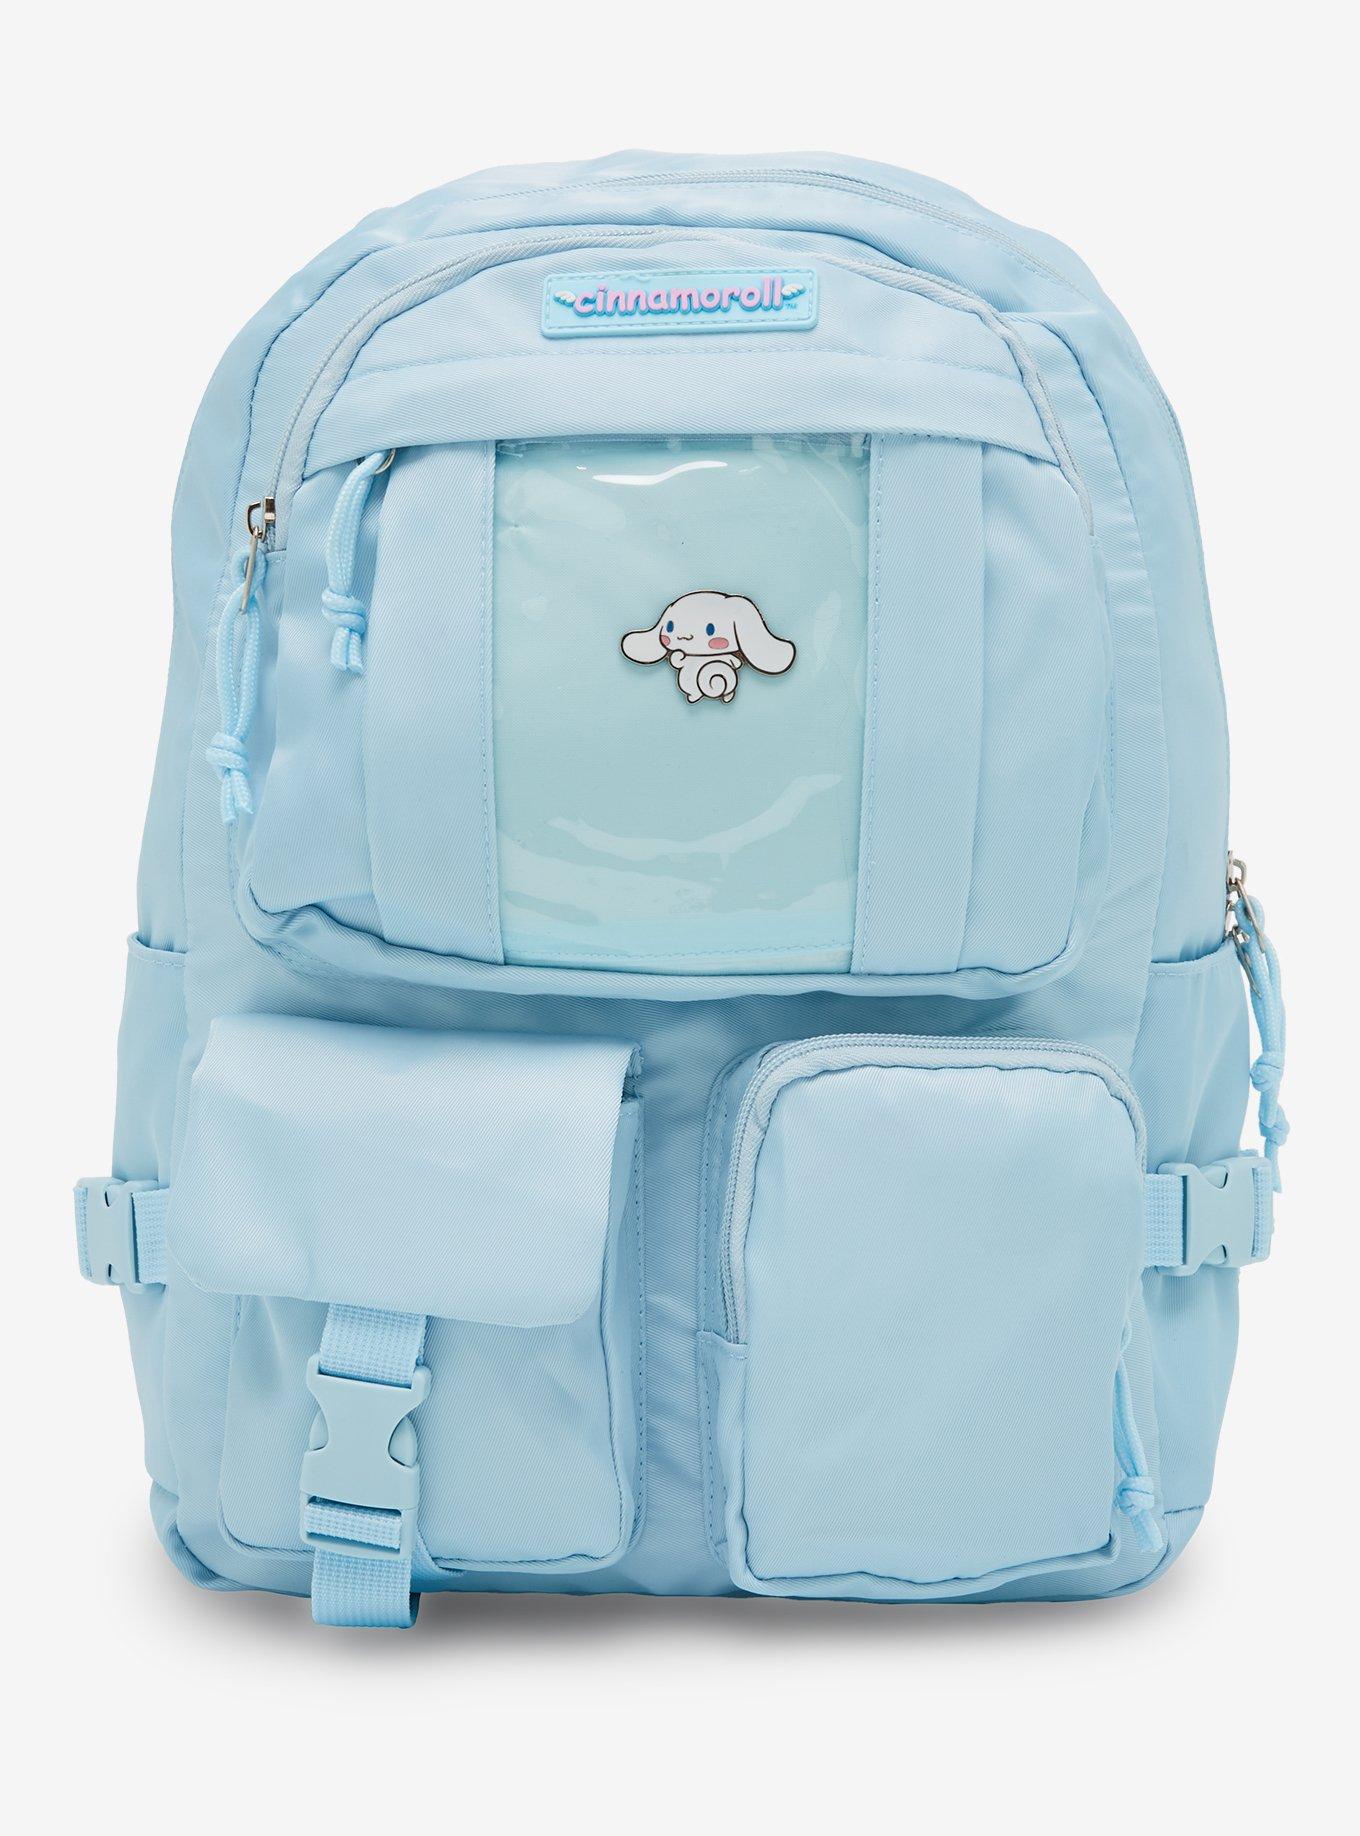 Is the new Multipocket Backpack available in store yet? : r